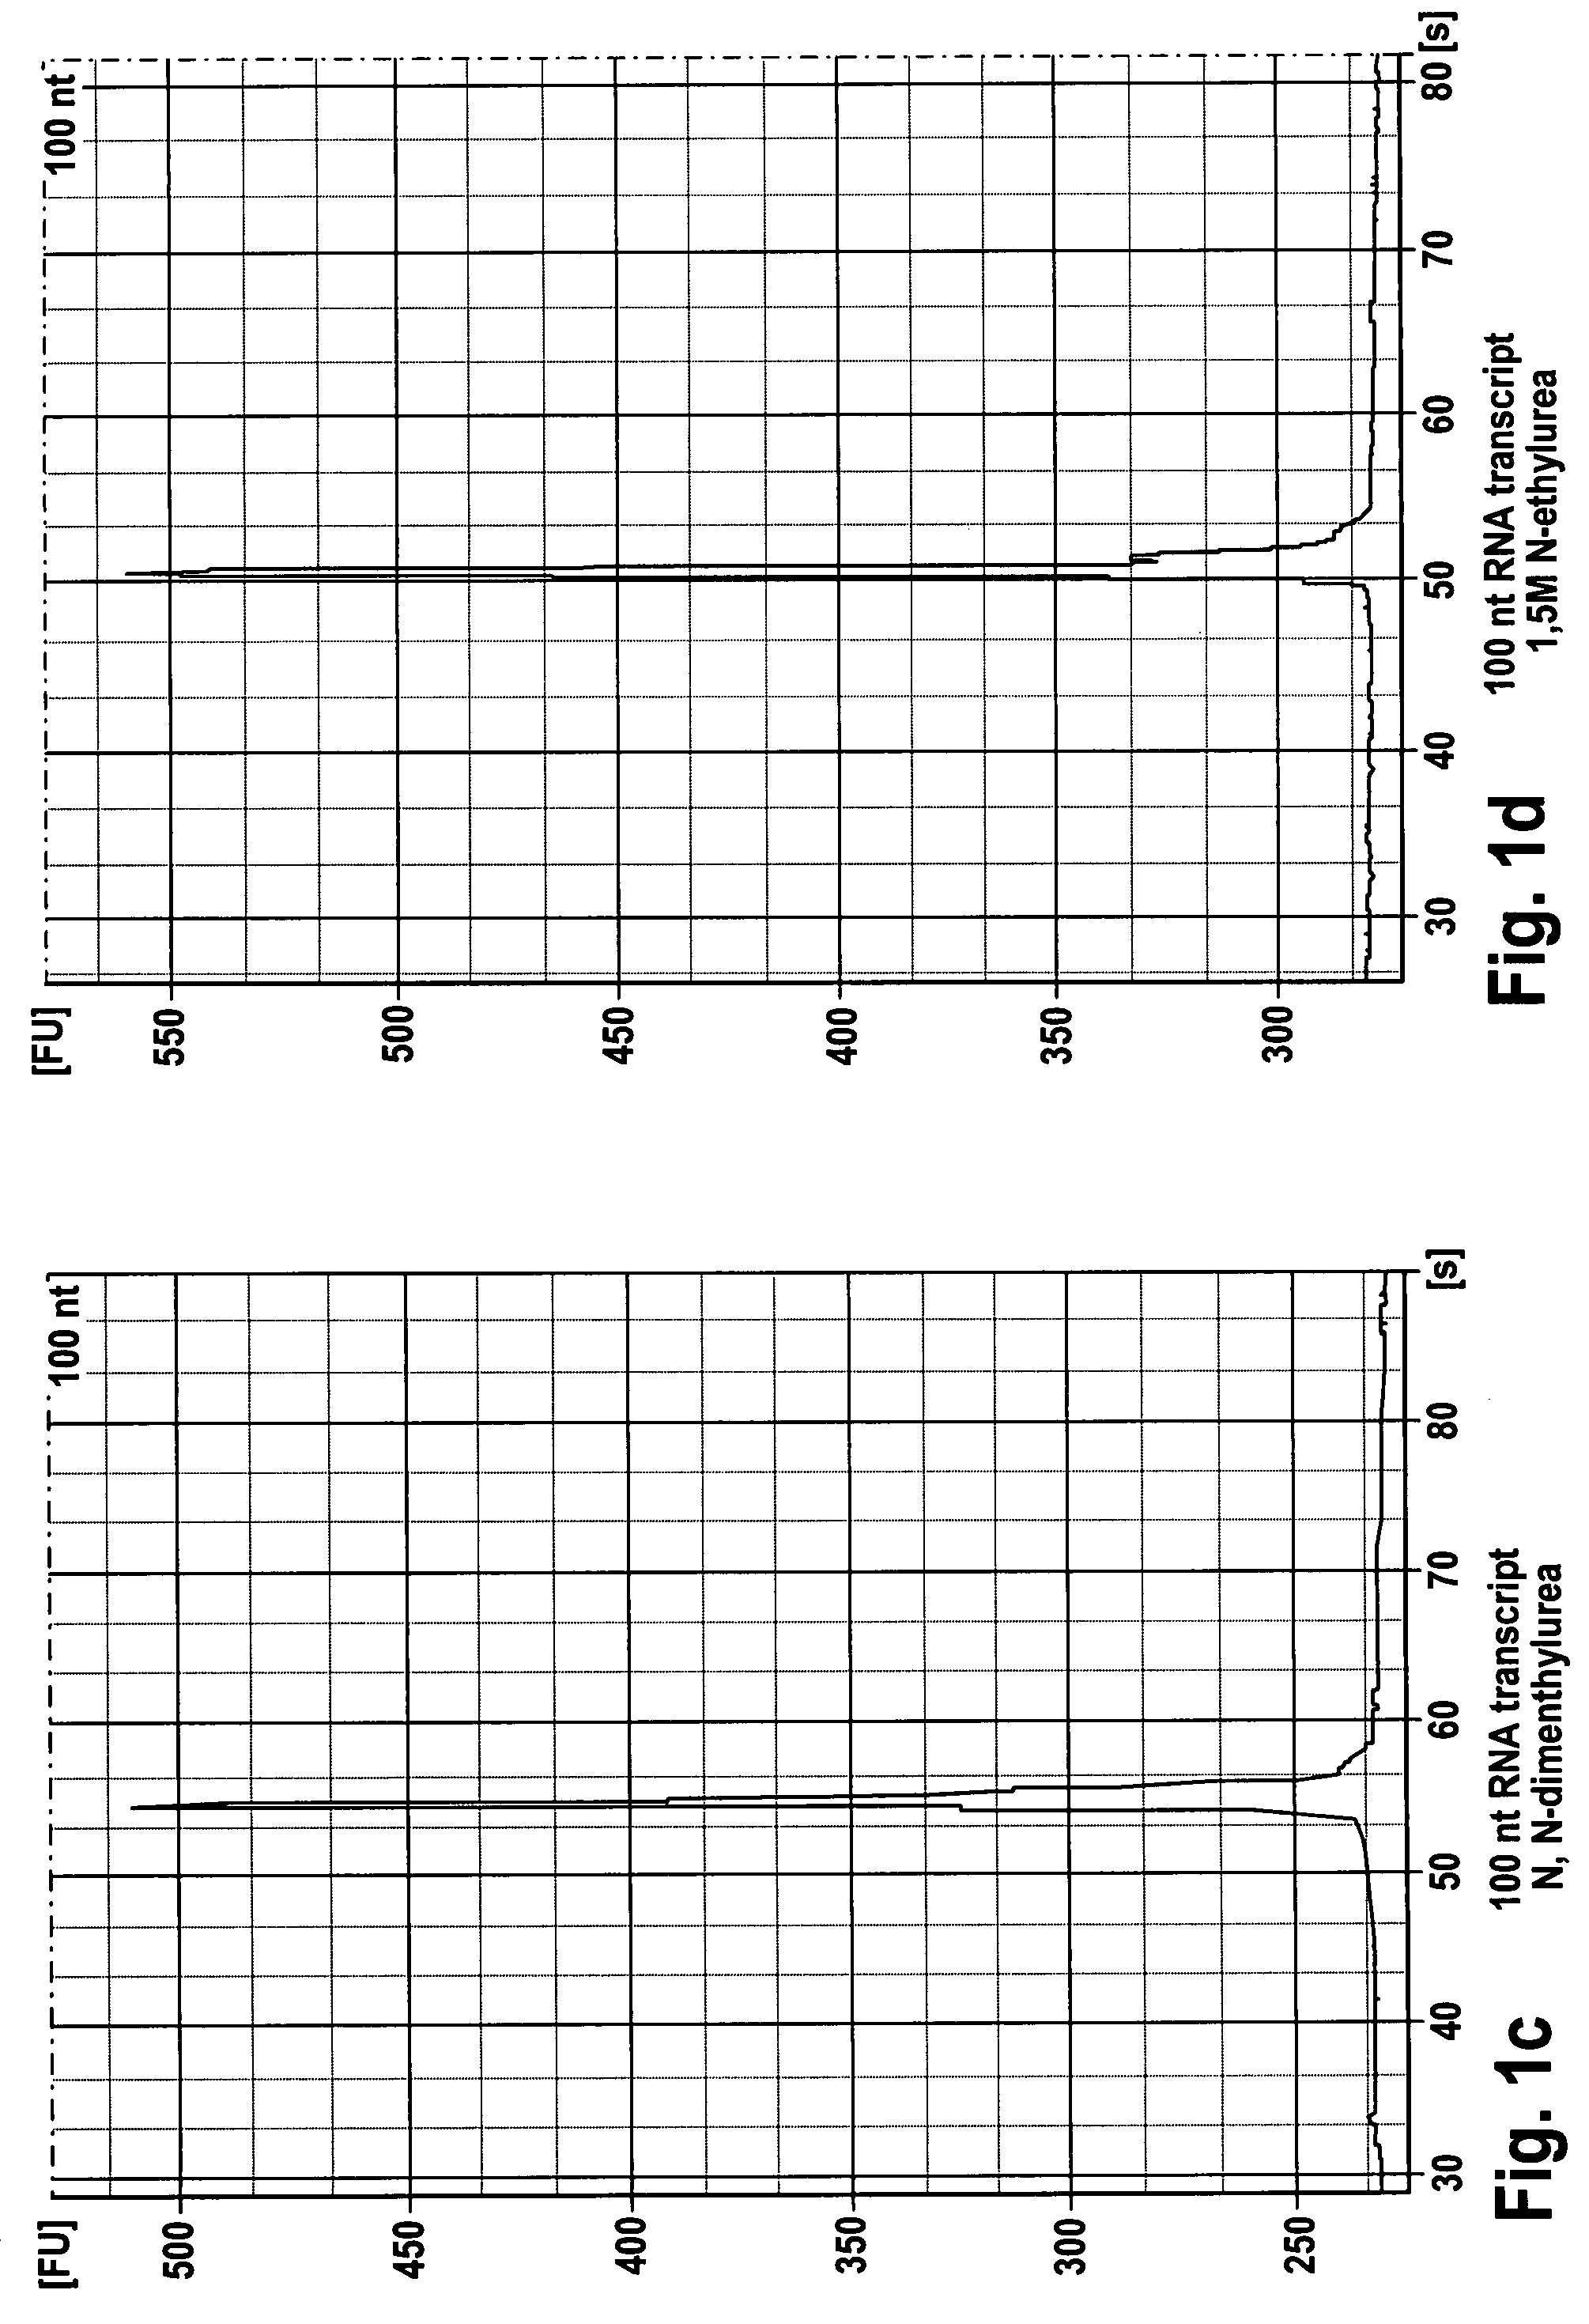 Medium for enhanced staining of single strand nucleic acids in electrophoresis